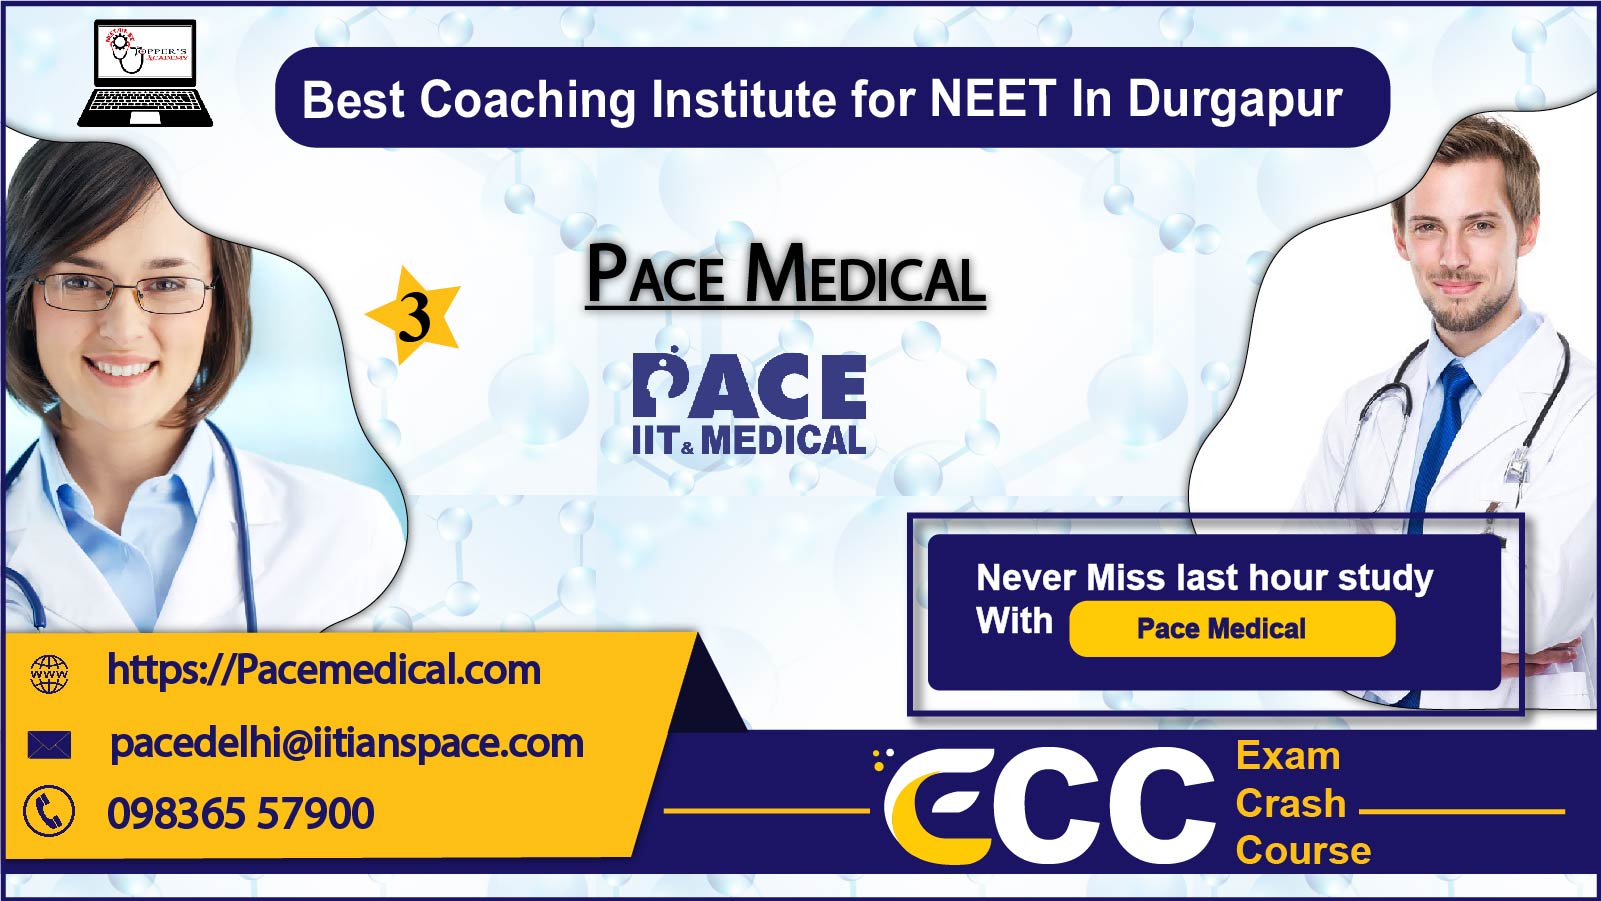 Pace Medical NEET Coaching in Durgapur